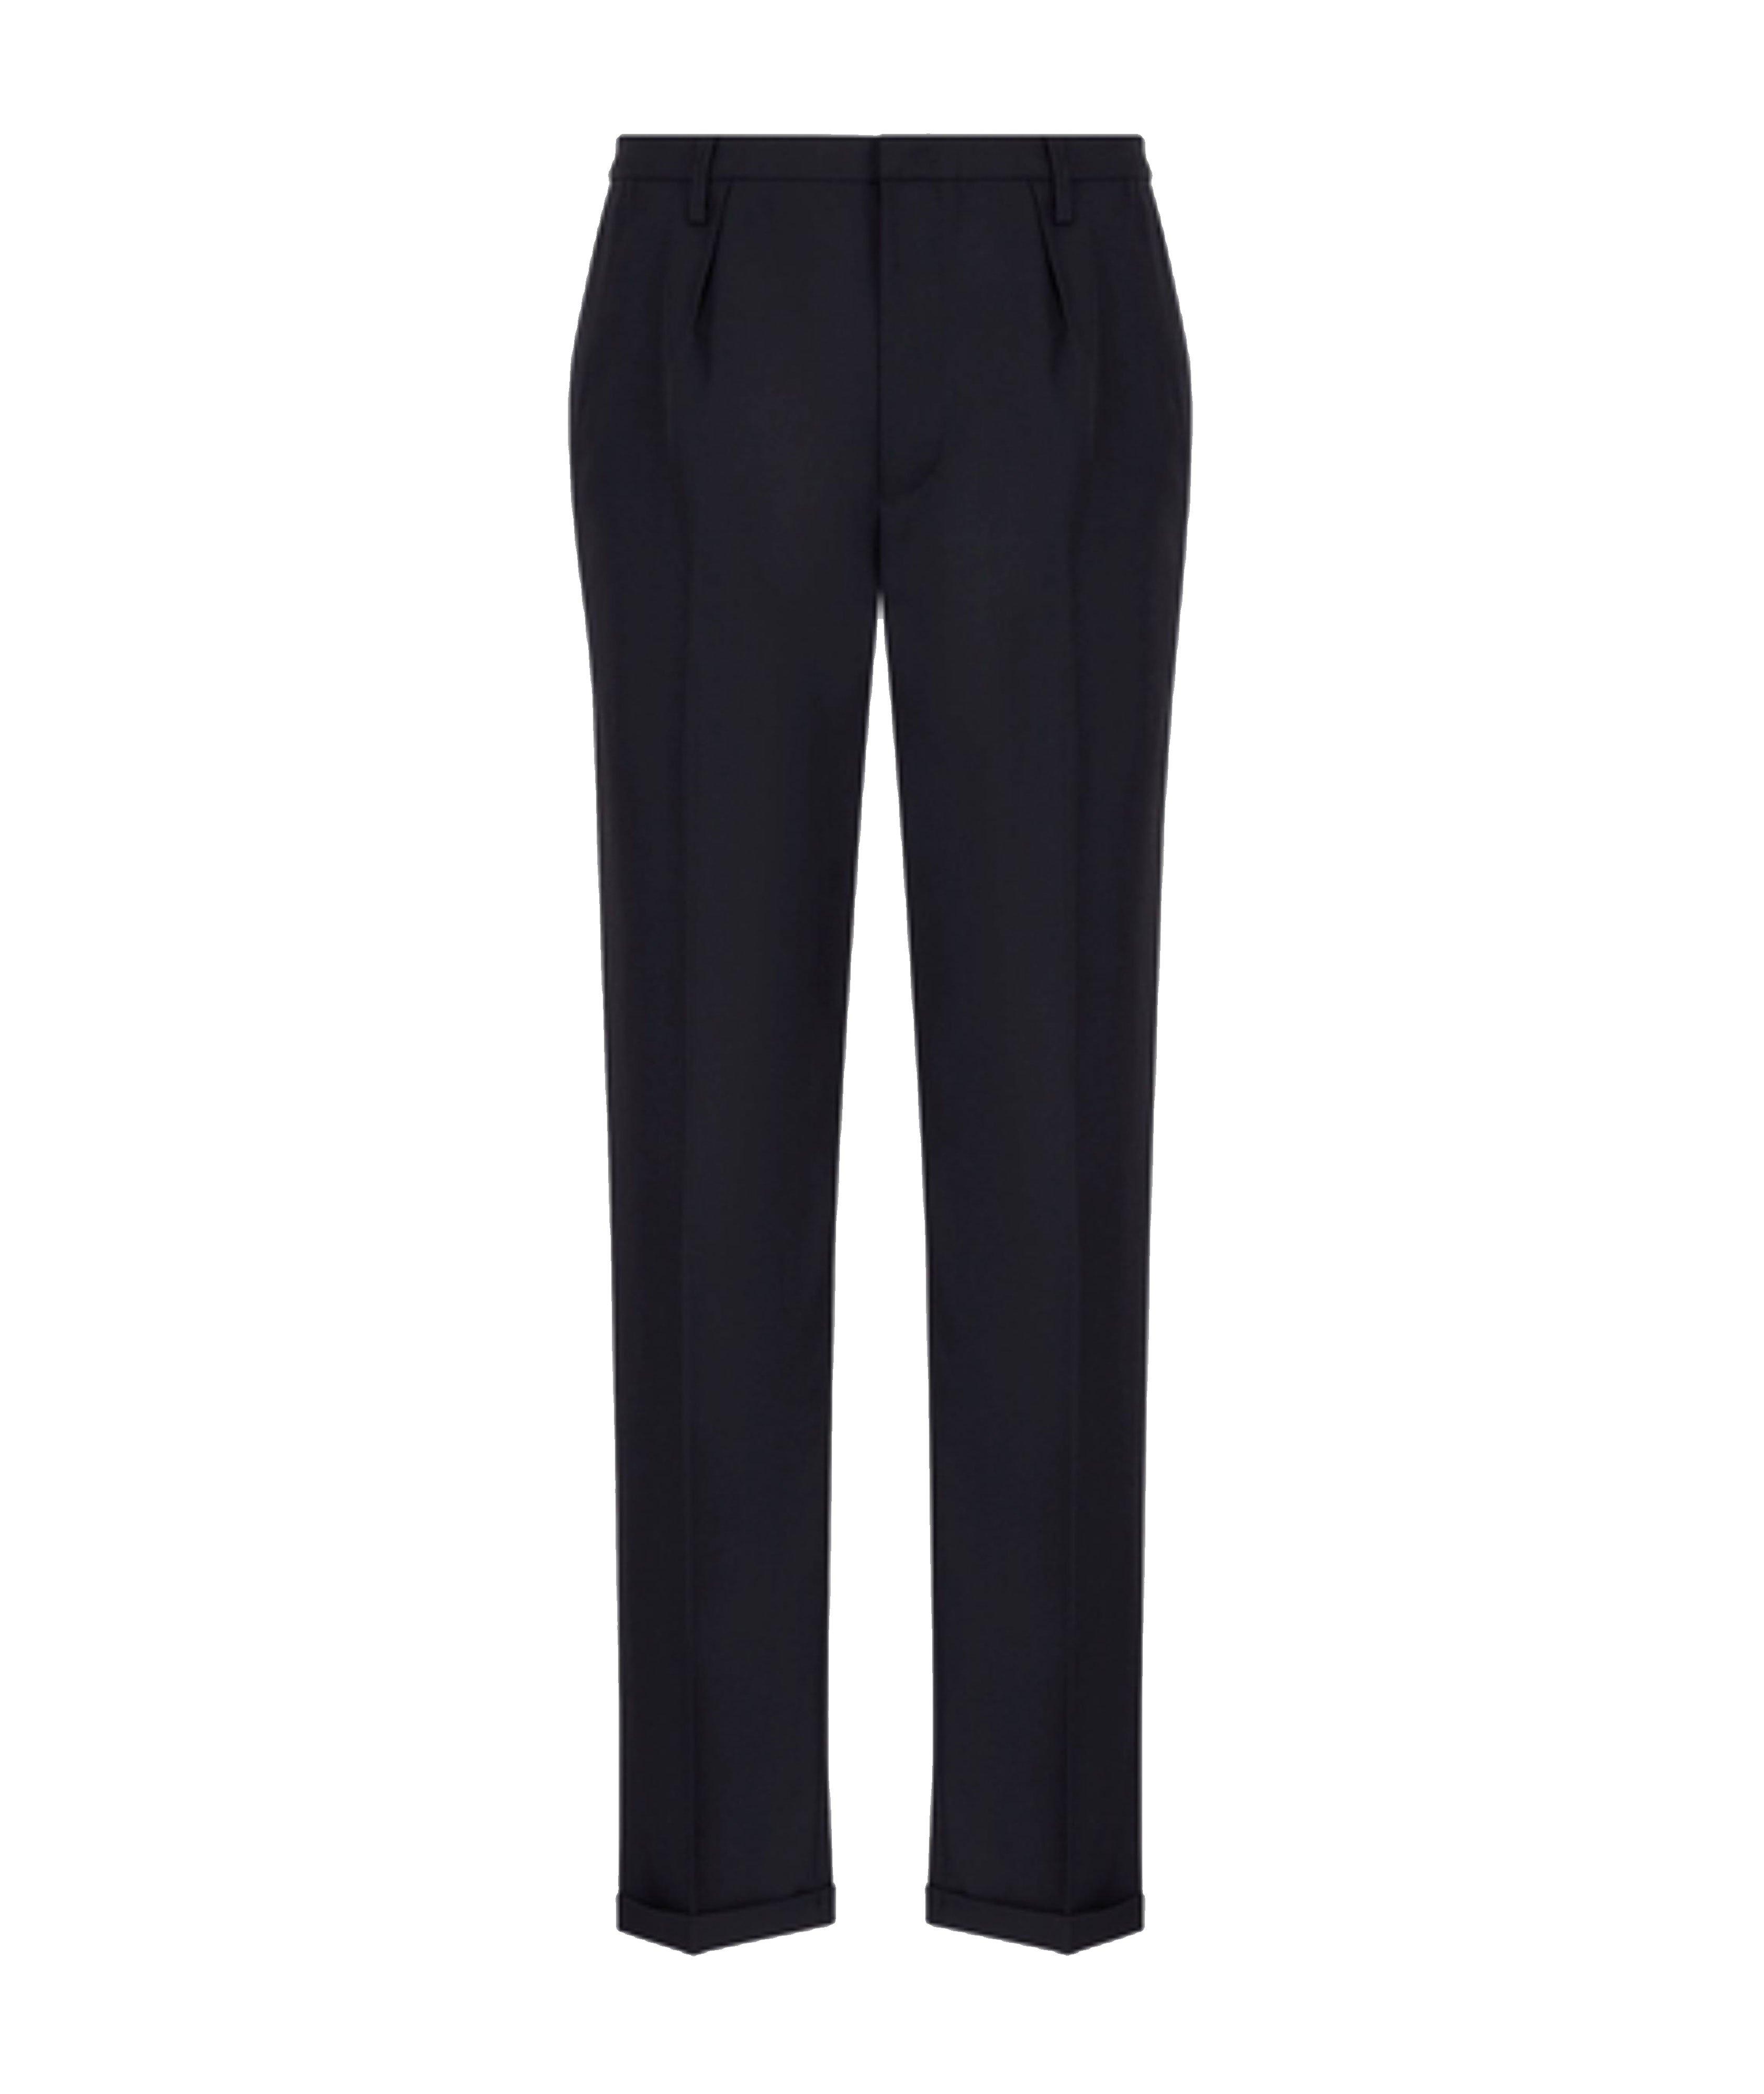 Cuffed Wool-blend Trousers image 0